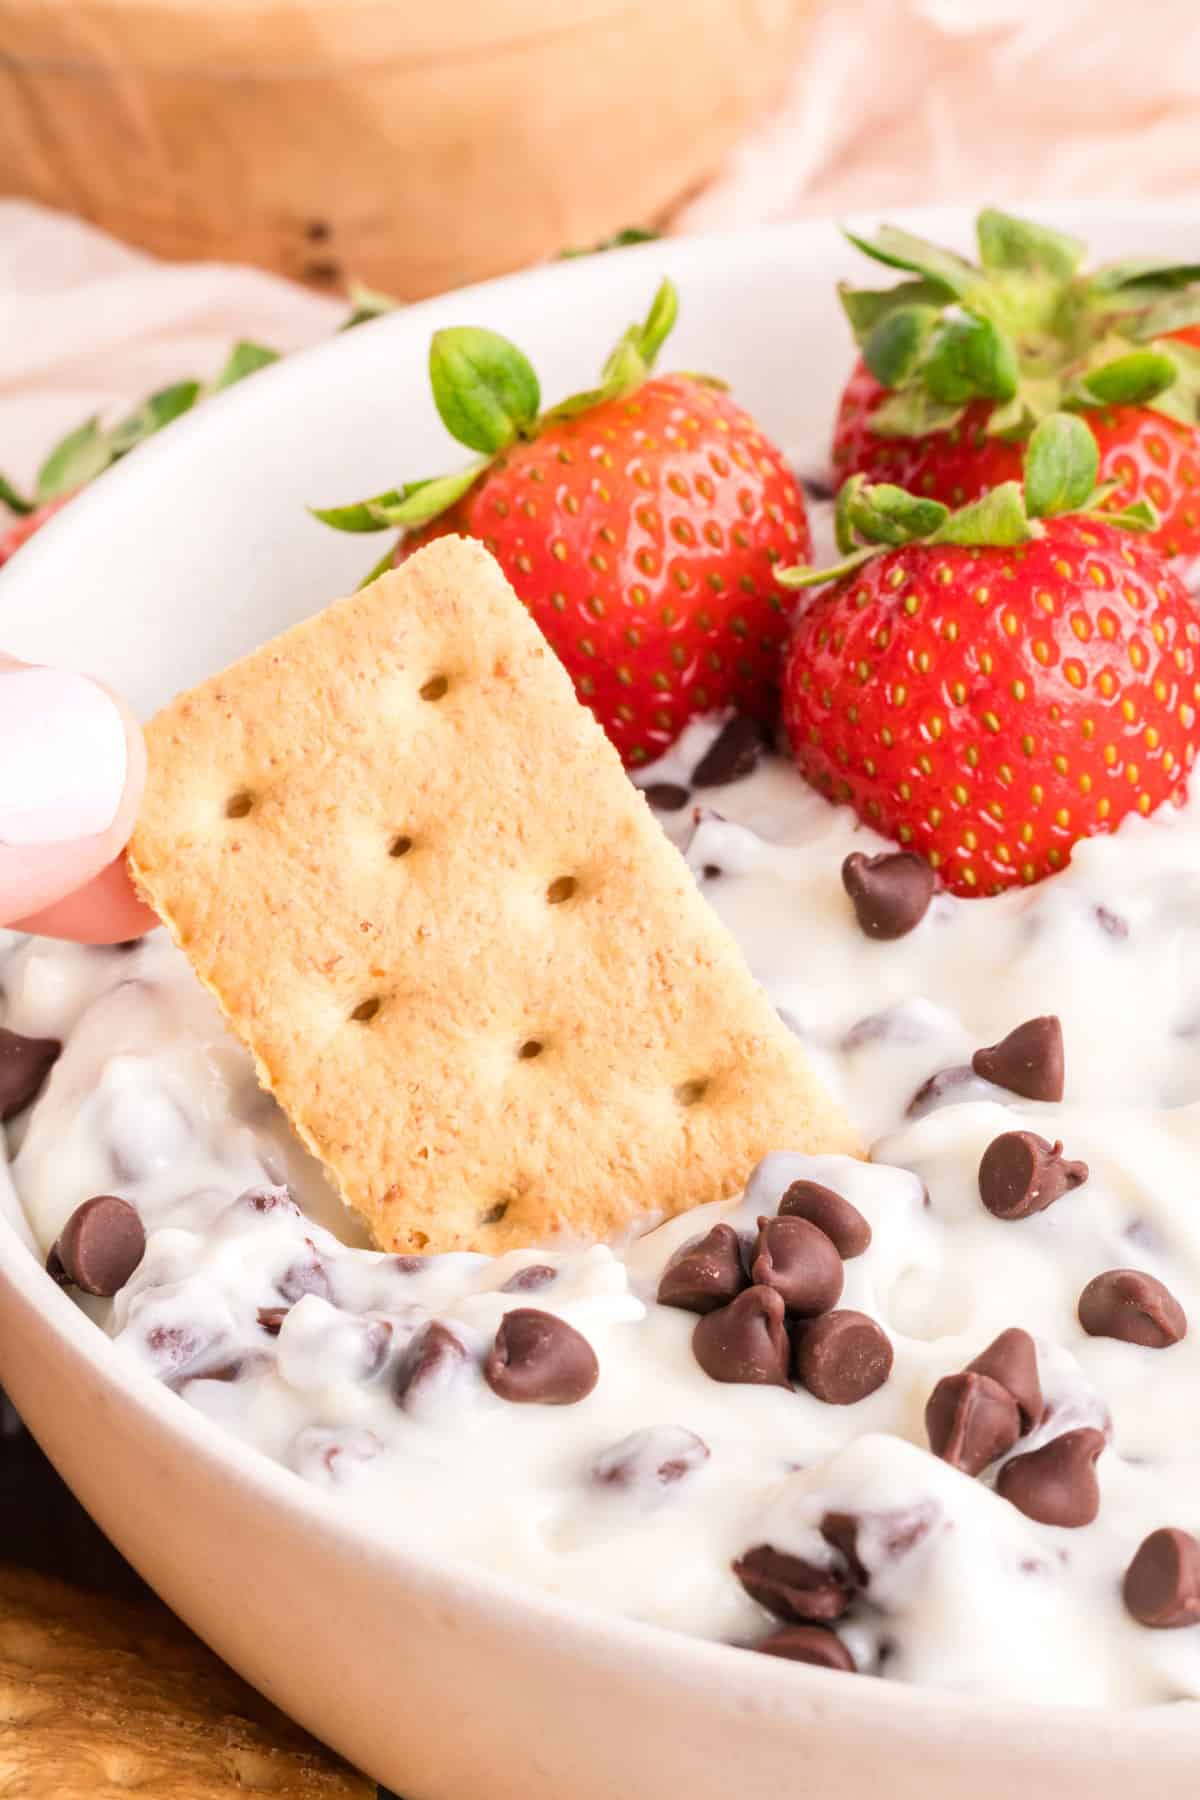 A person is dipping a cracker into a bowl of Cannoli Dip with strawberries and chocolate chips.